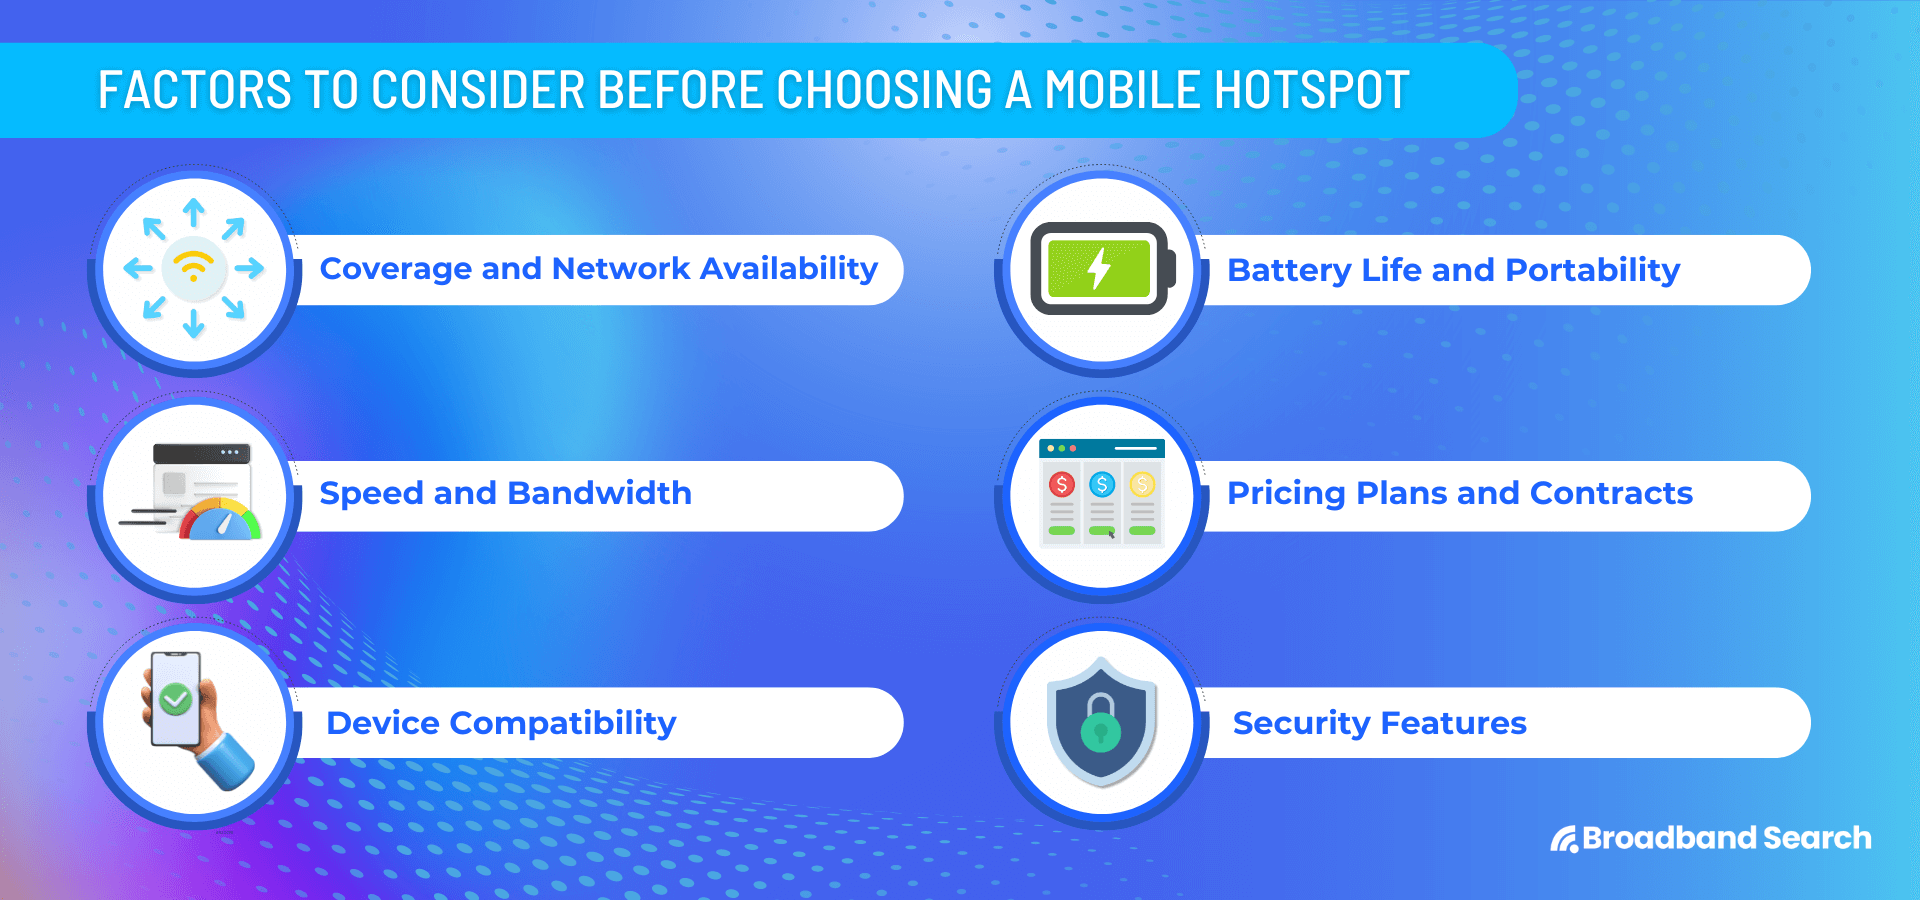 Factors to consider before choosing a mobile hotspot